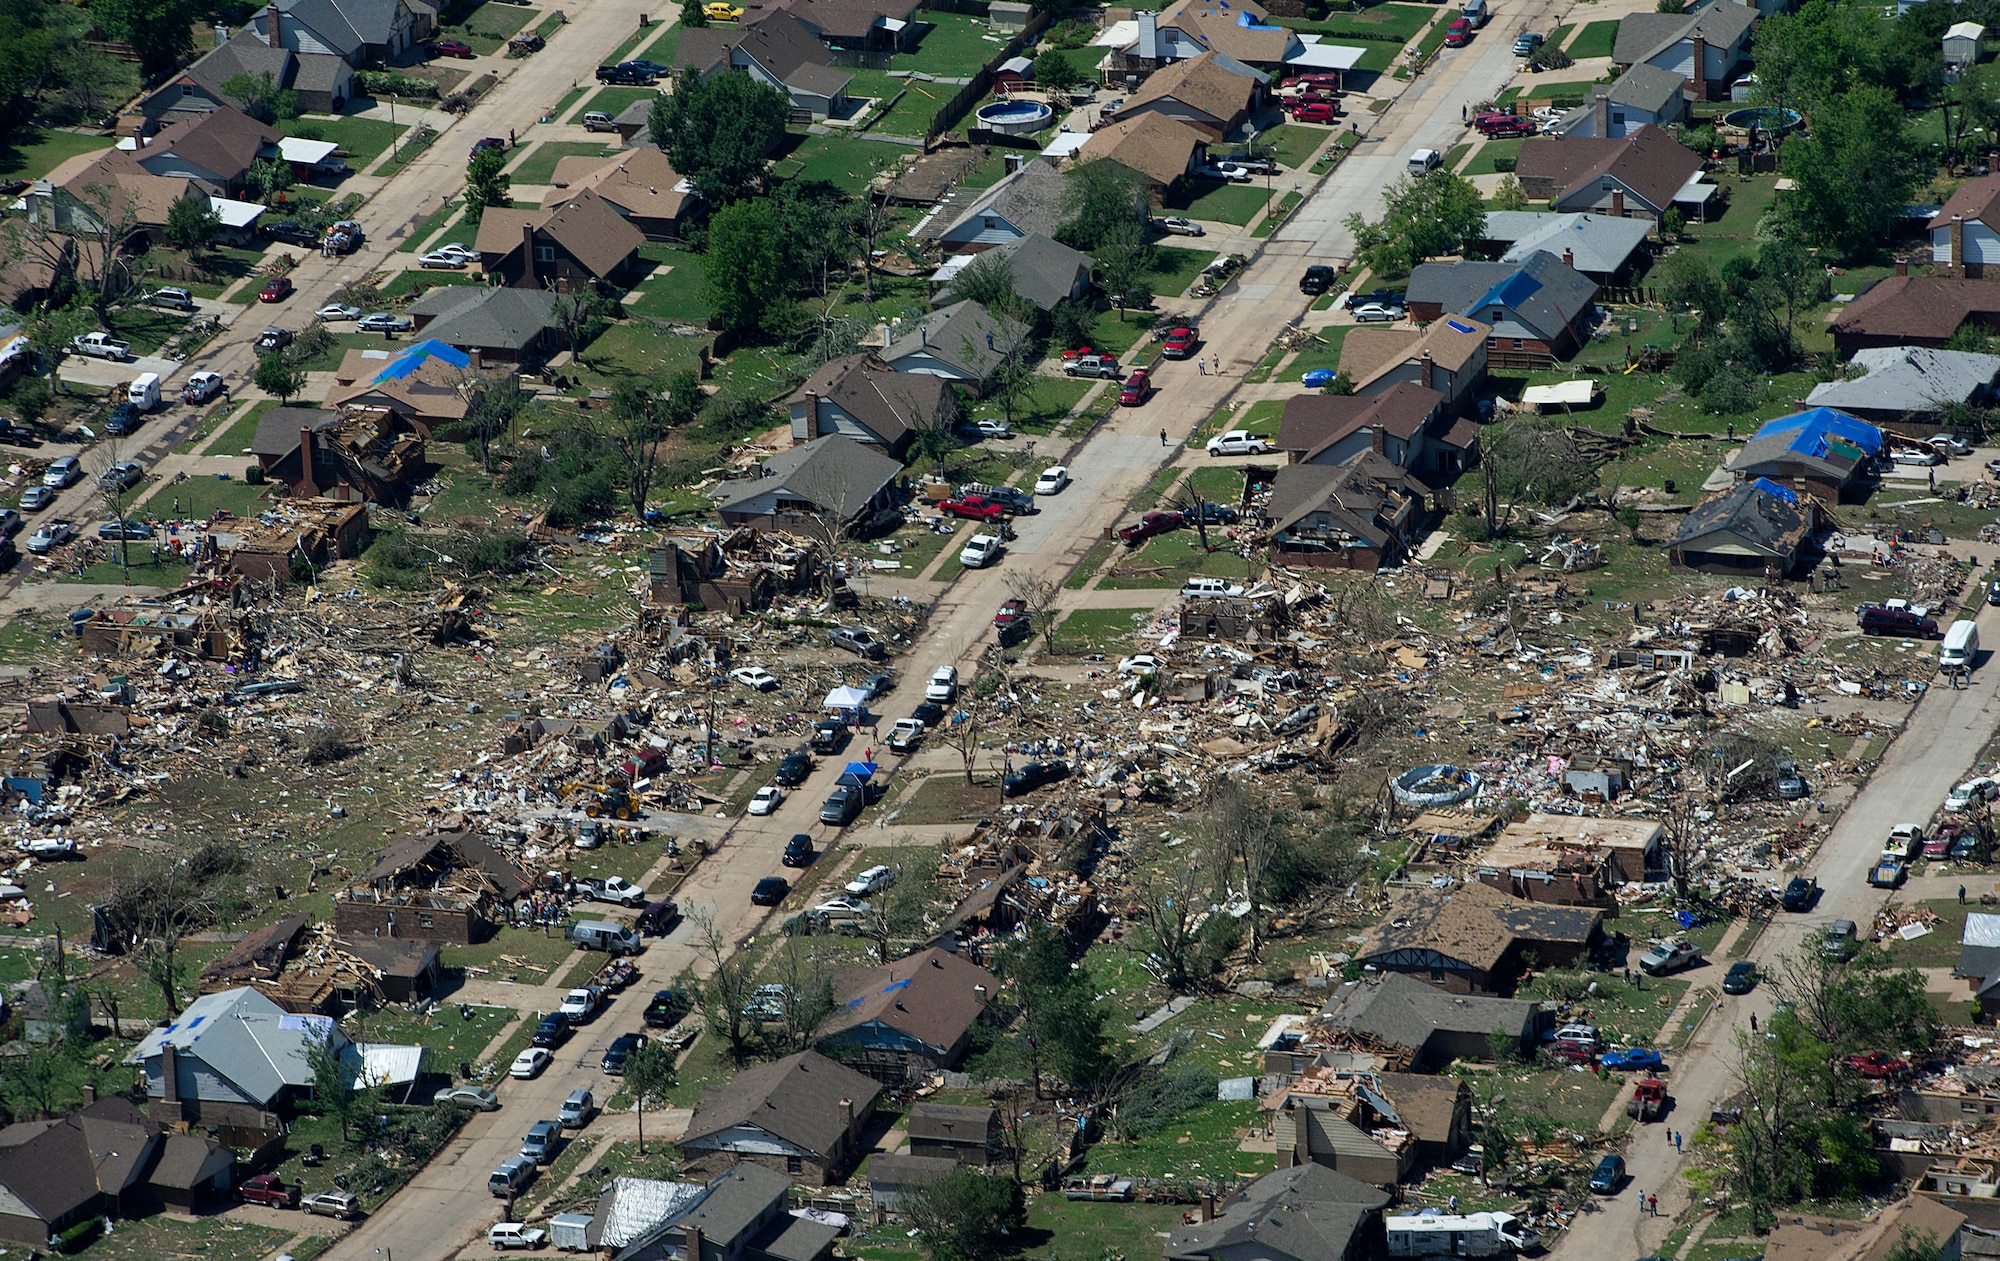 The path of a recent tornado in Moore, Okla., May 22, 2013. A tornado categorized as an EF5, the strongest category possible, with winds ranging from 200 to 210 mph struck Moore May 20, 2013. Oklahoma Insurance Department officials estimate nearly $2 billion in damage may have occurred in the affected areas. (U.S. Air Force photo/Tech. Sgt. Bradley C. Church)  